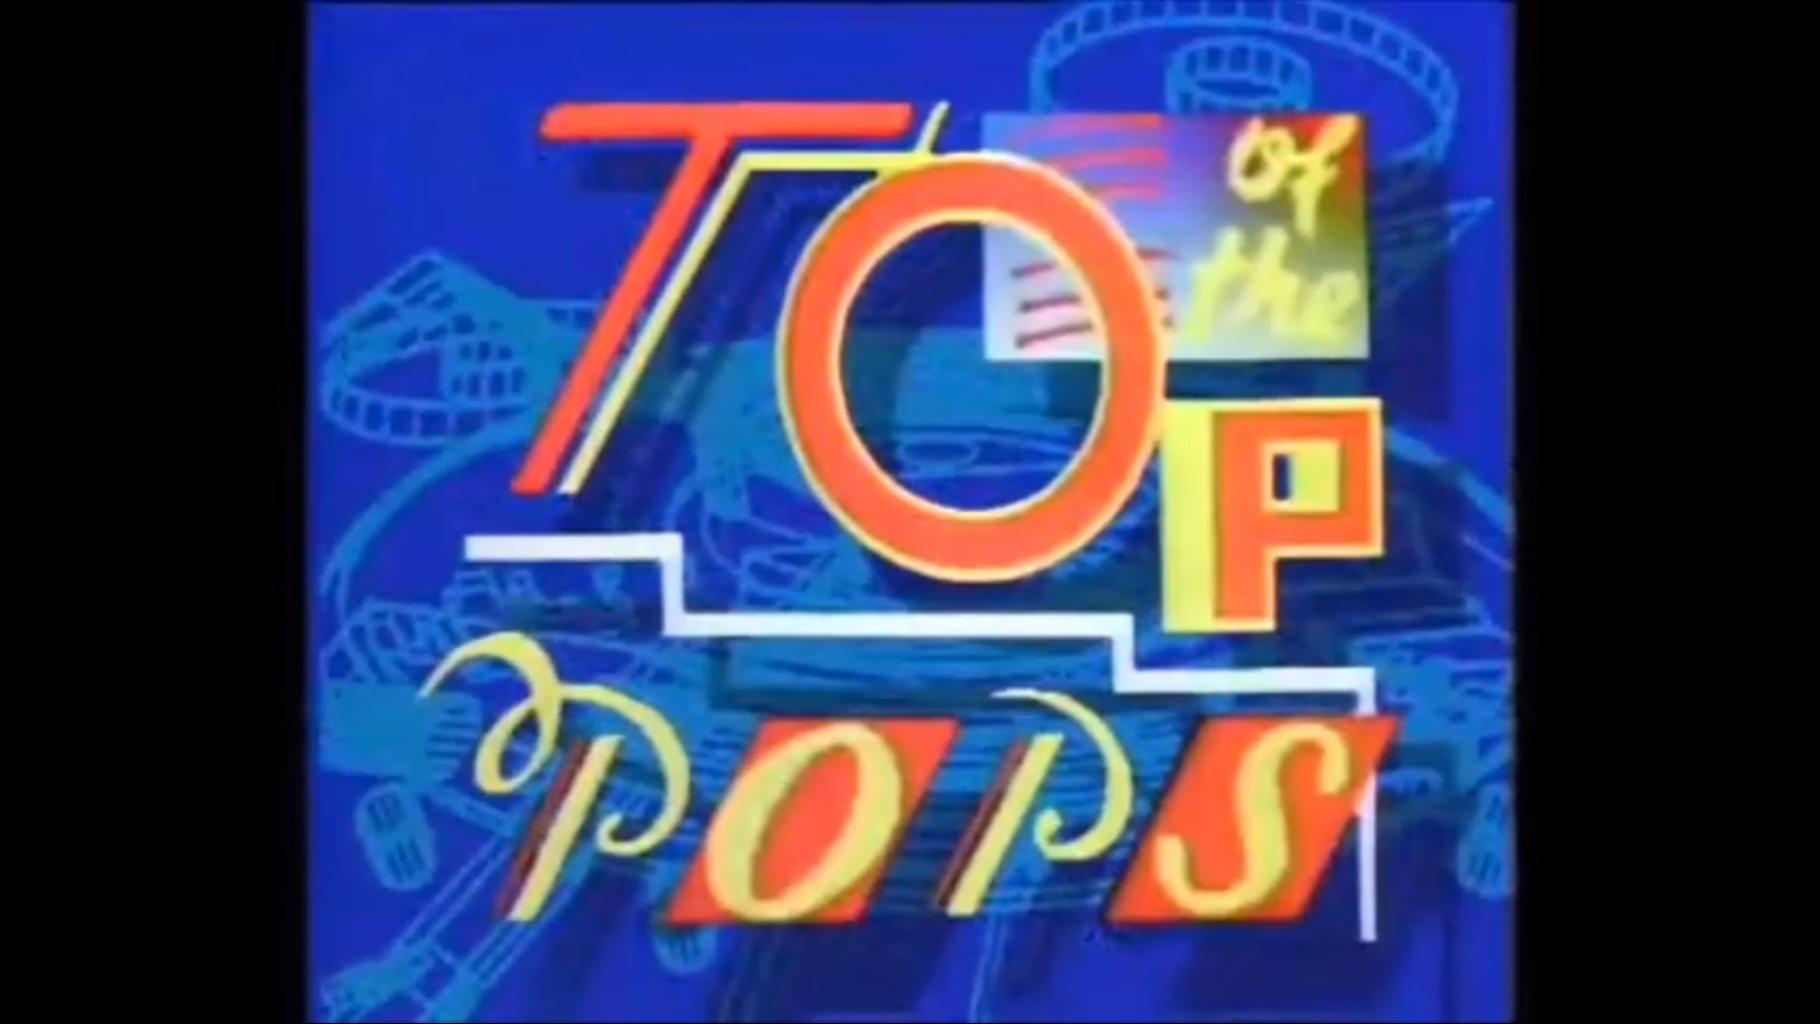 Top Of The Pops (TOTP) 1987 title card